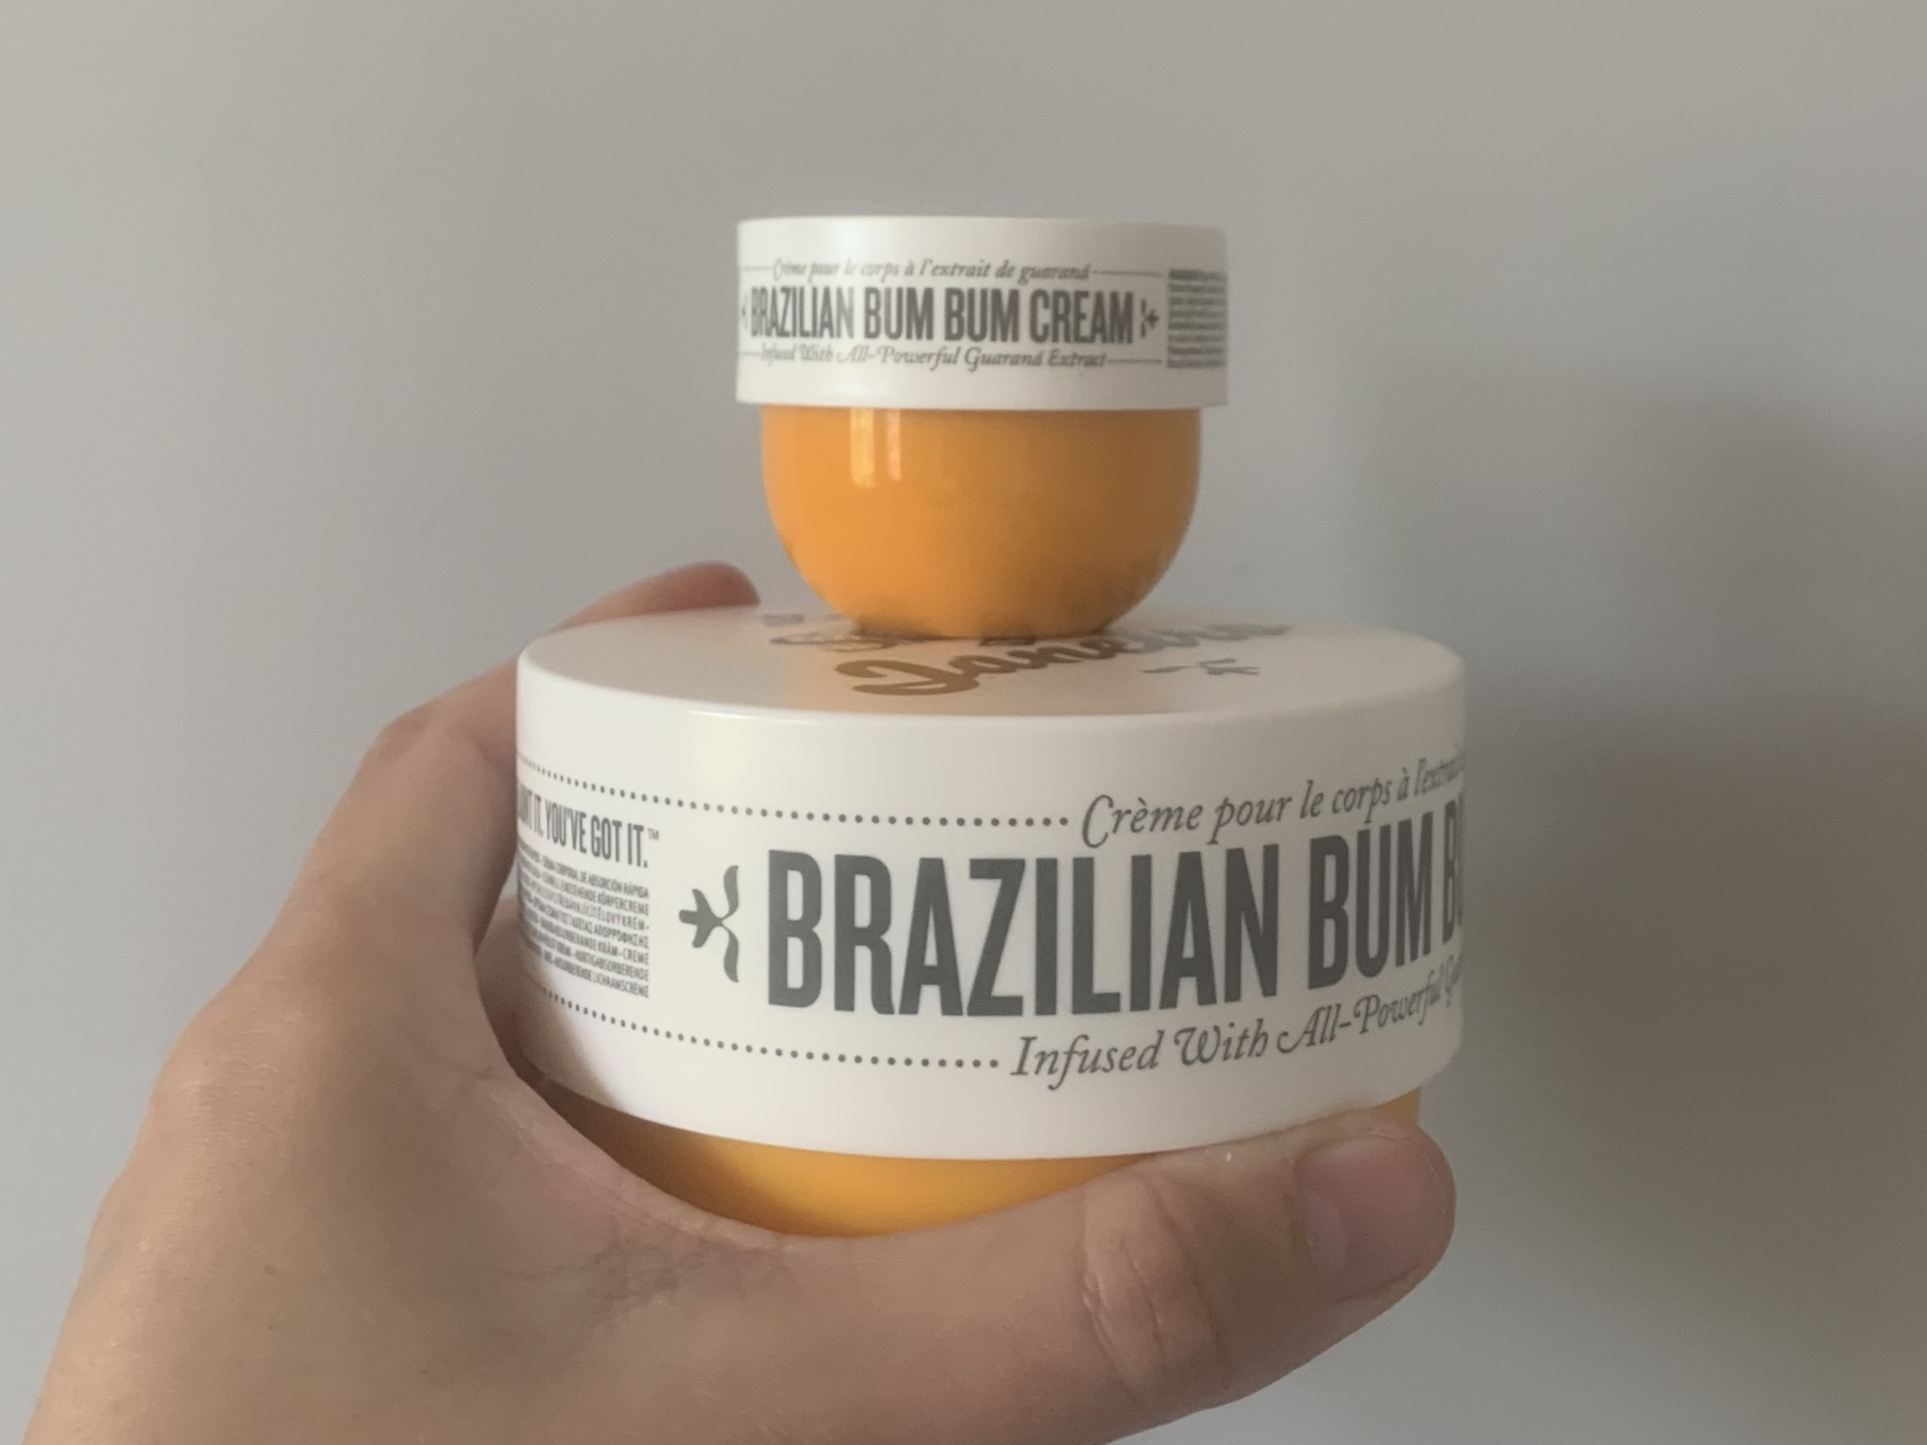 I tested the Brazilian Bum Bum cream — here are my thoughts